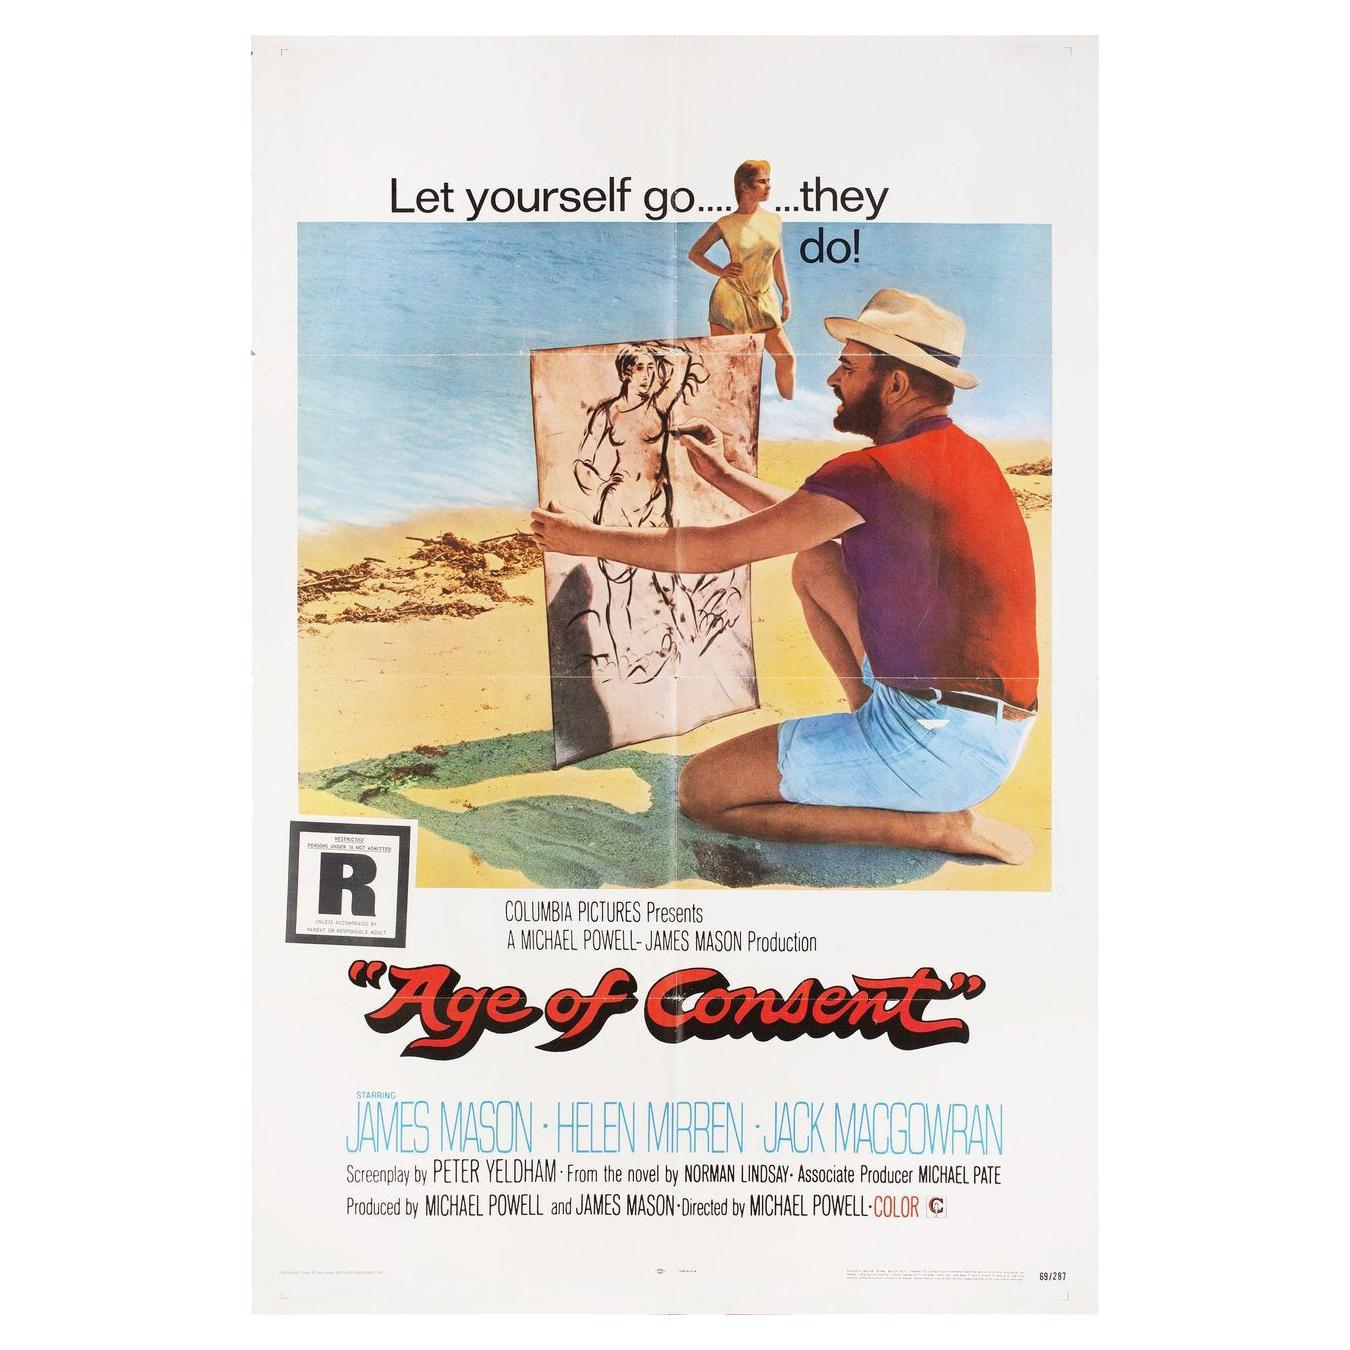 'Age of Consent' 1969 U.S. One Sheet Film Poster